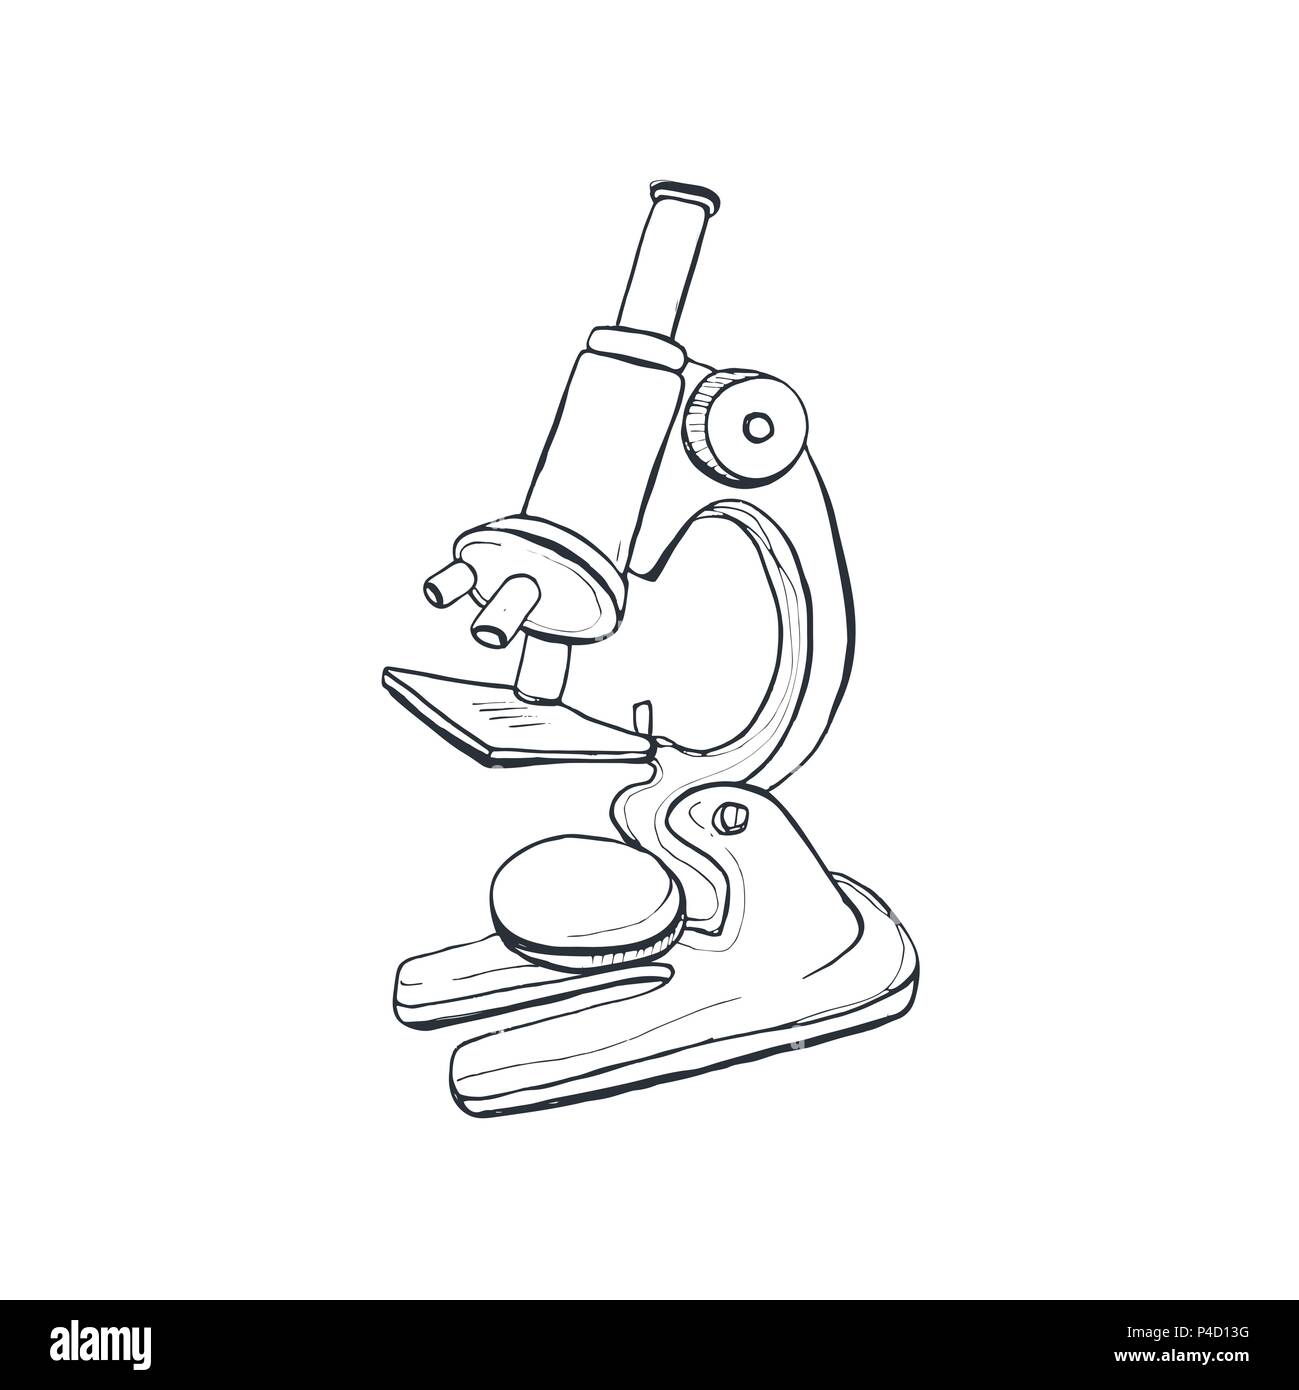 What is diffrent type of disecting microscope and compound microscope? -  Studiesfocus - Quora